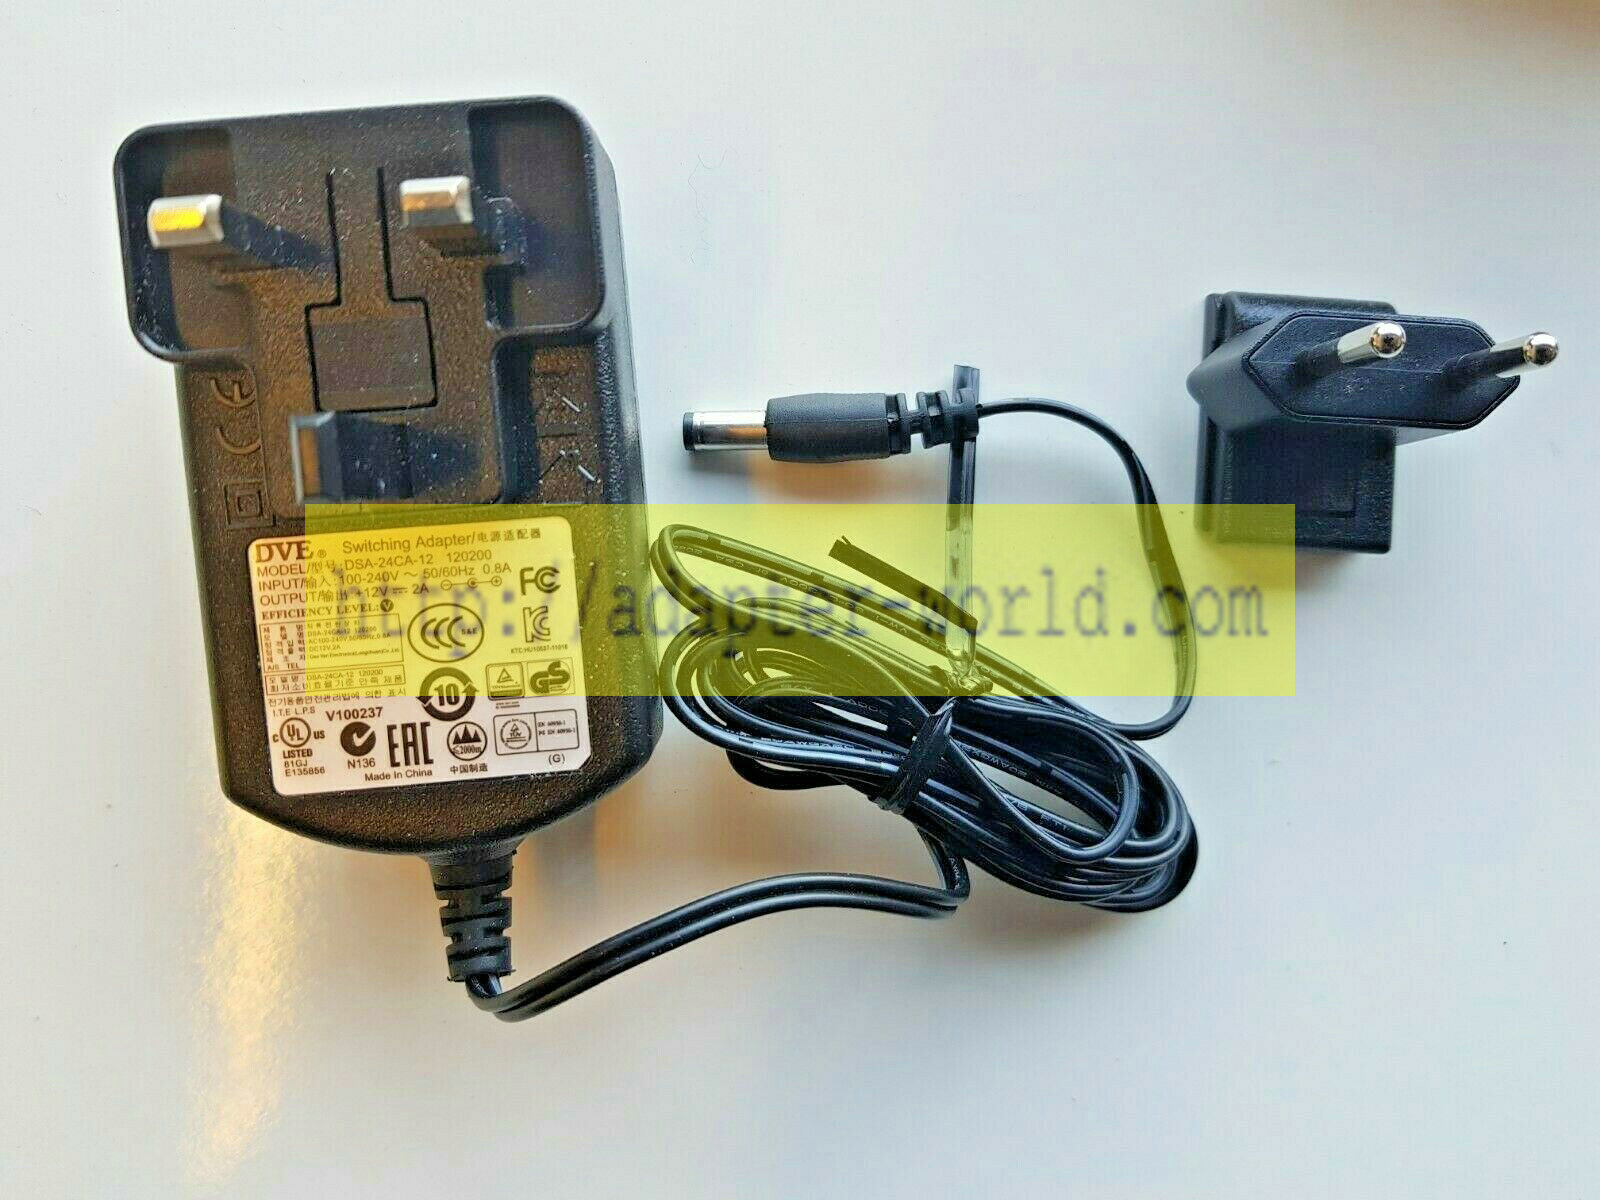 *Brand NEW*DVE DSA-24CA-12 120200 12V 2.0A SWITCHING ADAPTER POWER SUPPLY